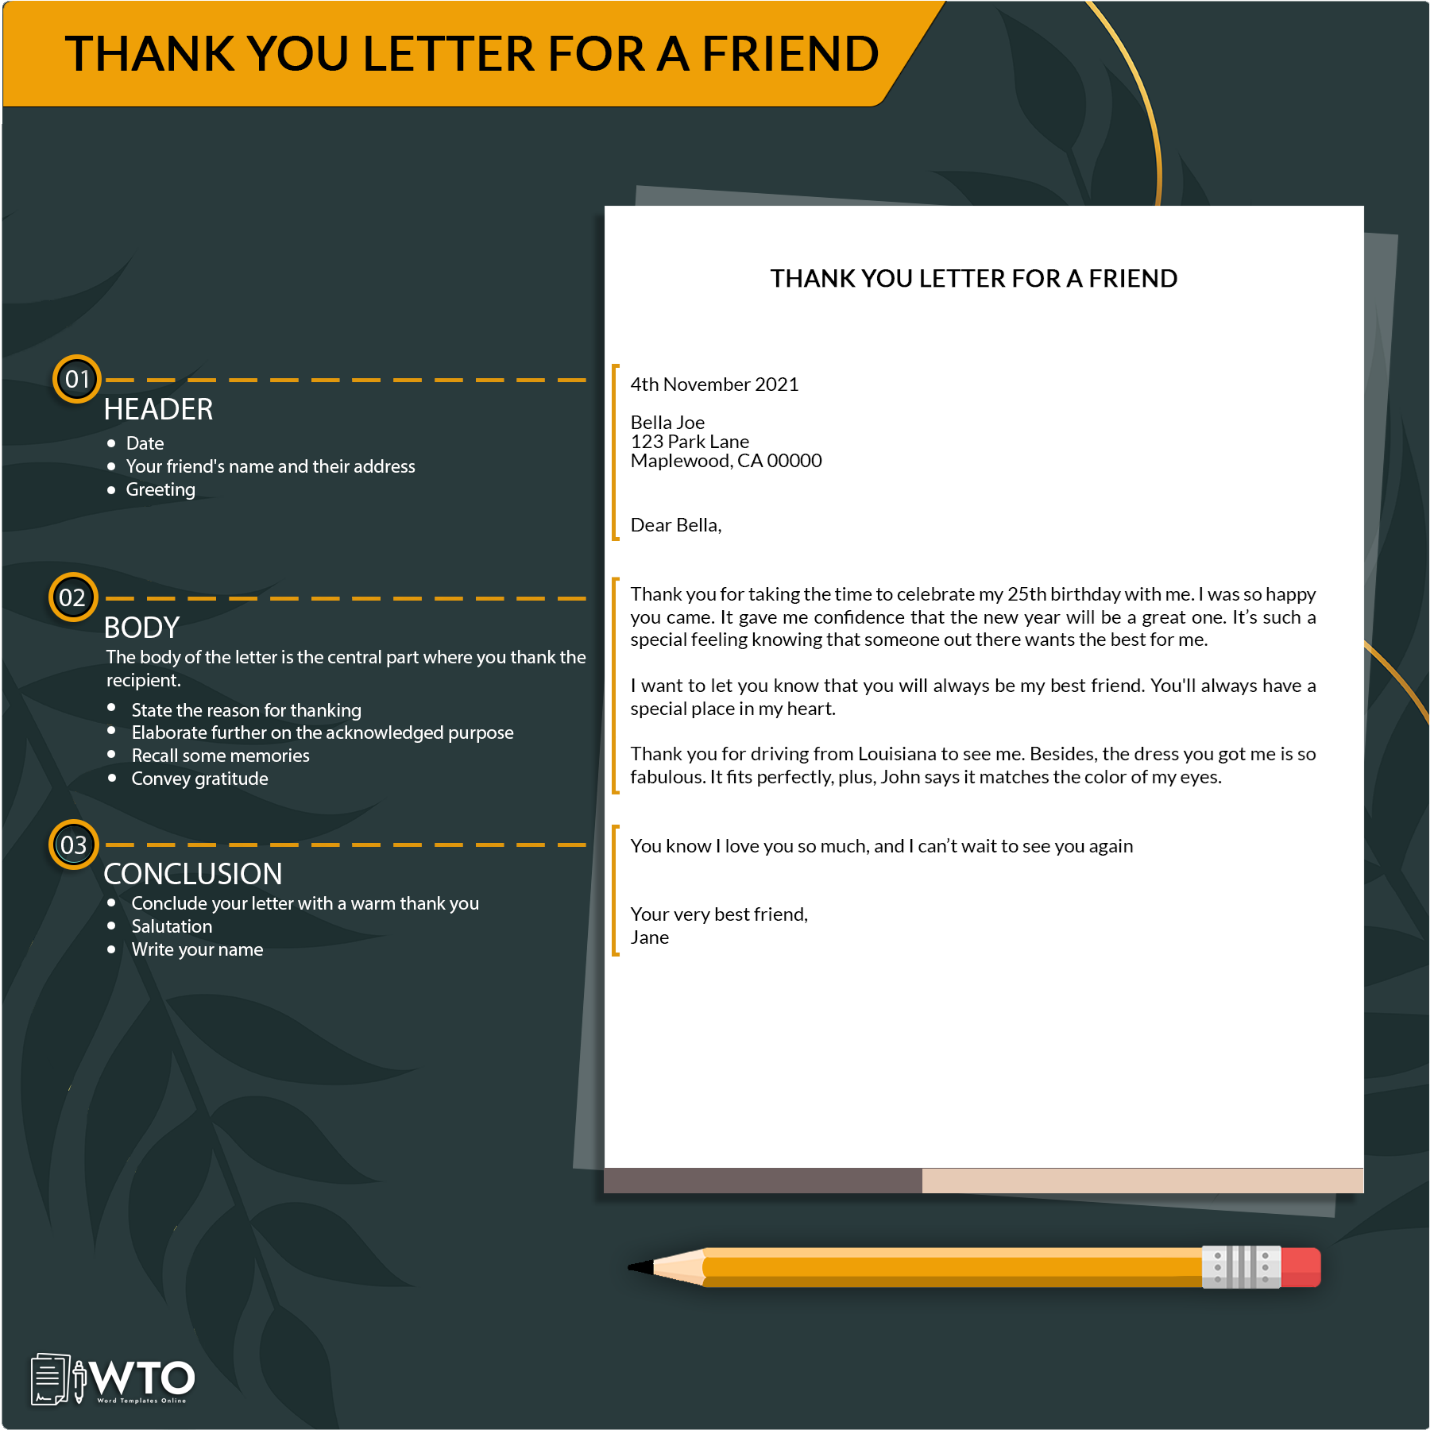 an appreciation letter to a friend